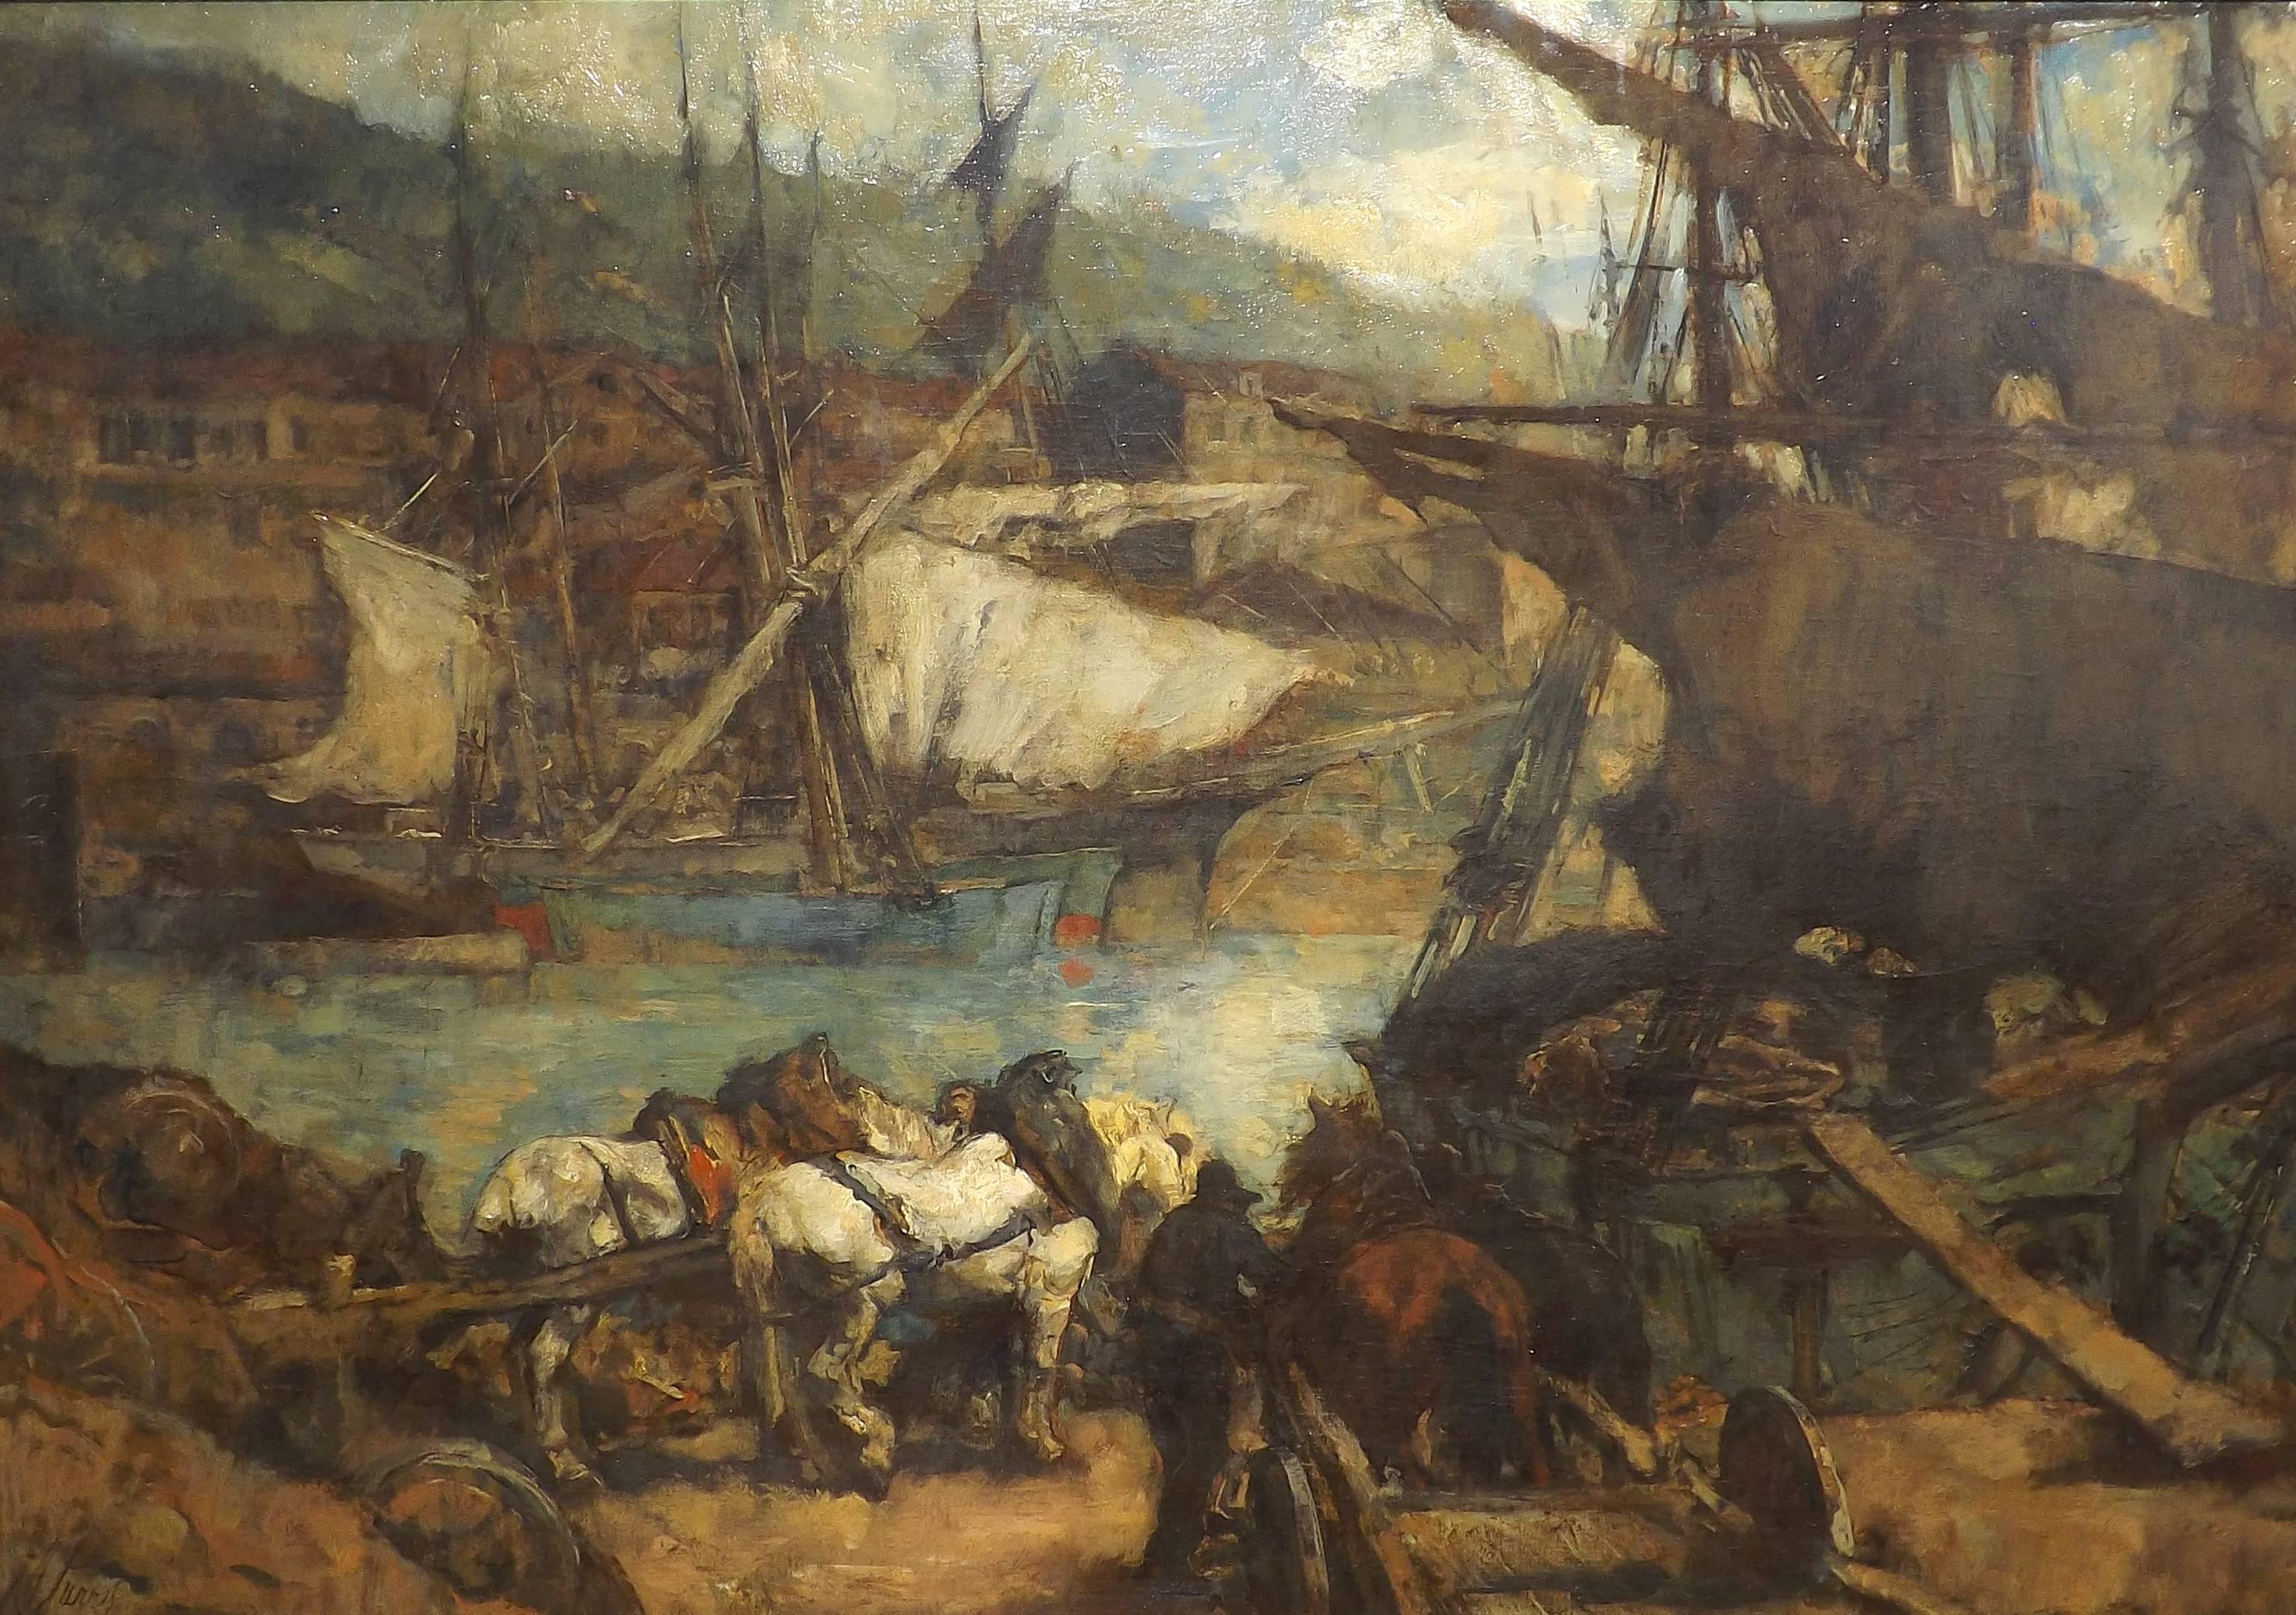 Workers busy themselves leading massive work horses towards the docked boats in this magnificent work by accomplished artist and historian Professor Johannes Hendrikus Jurres.

Jurres was not only an accomplished artist and art teacher, but also